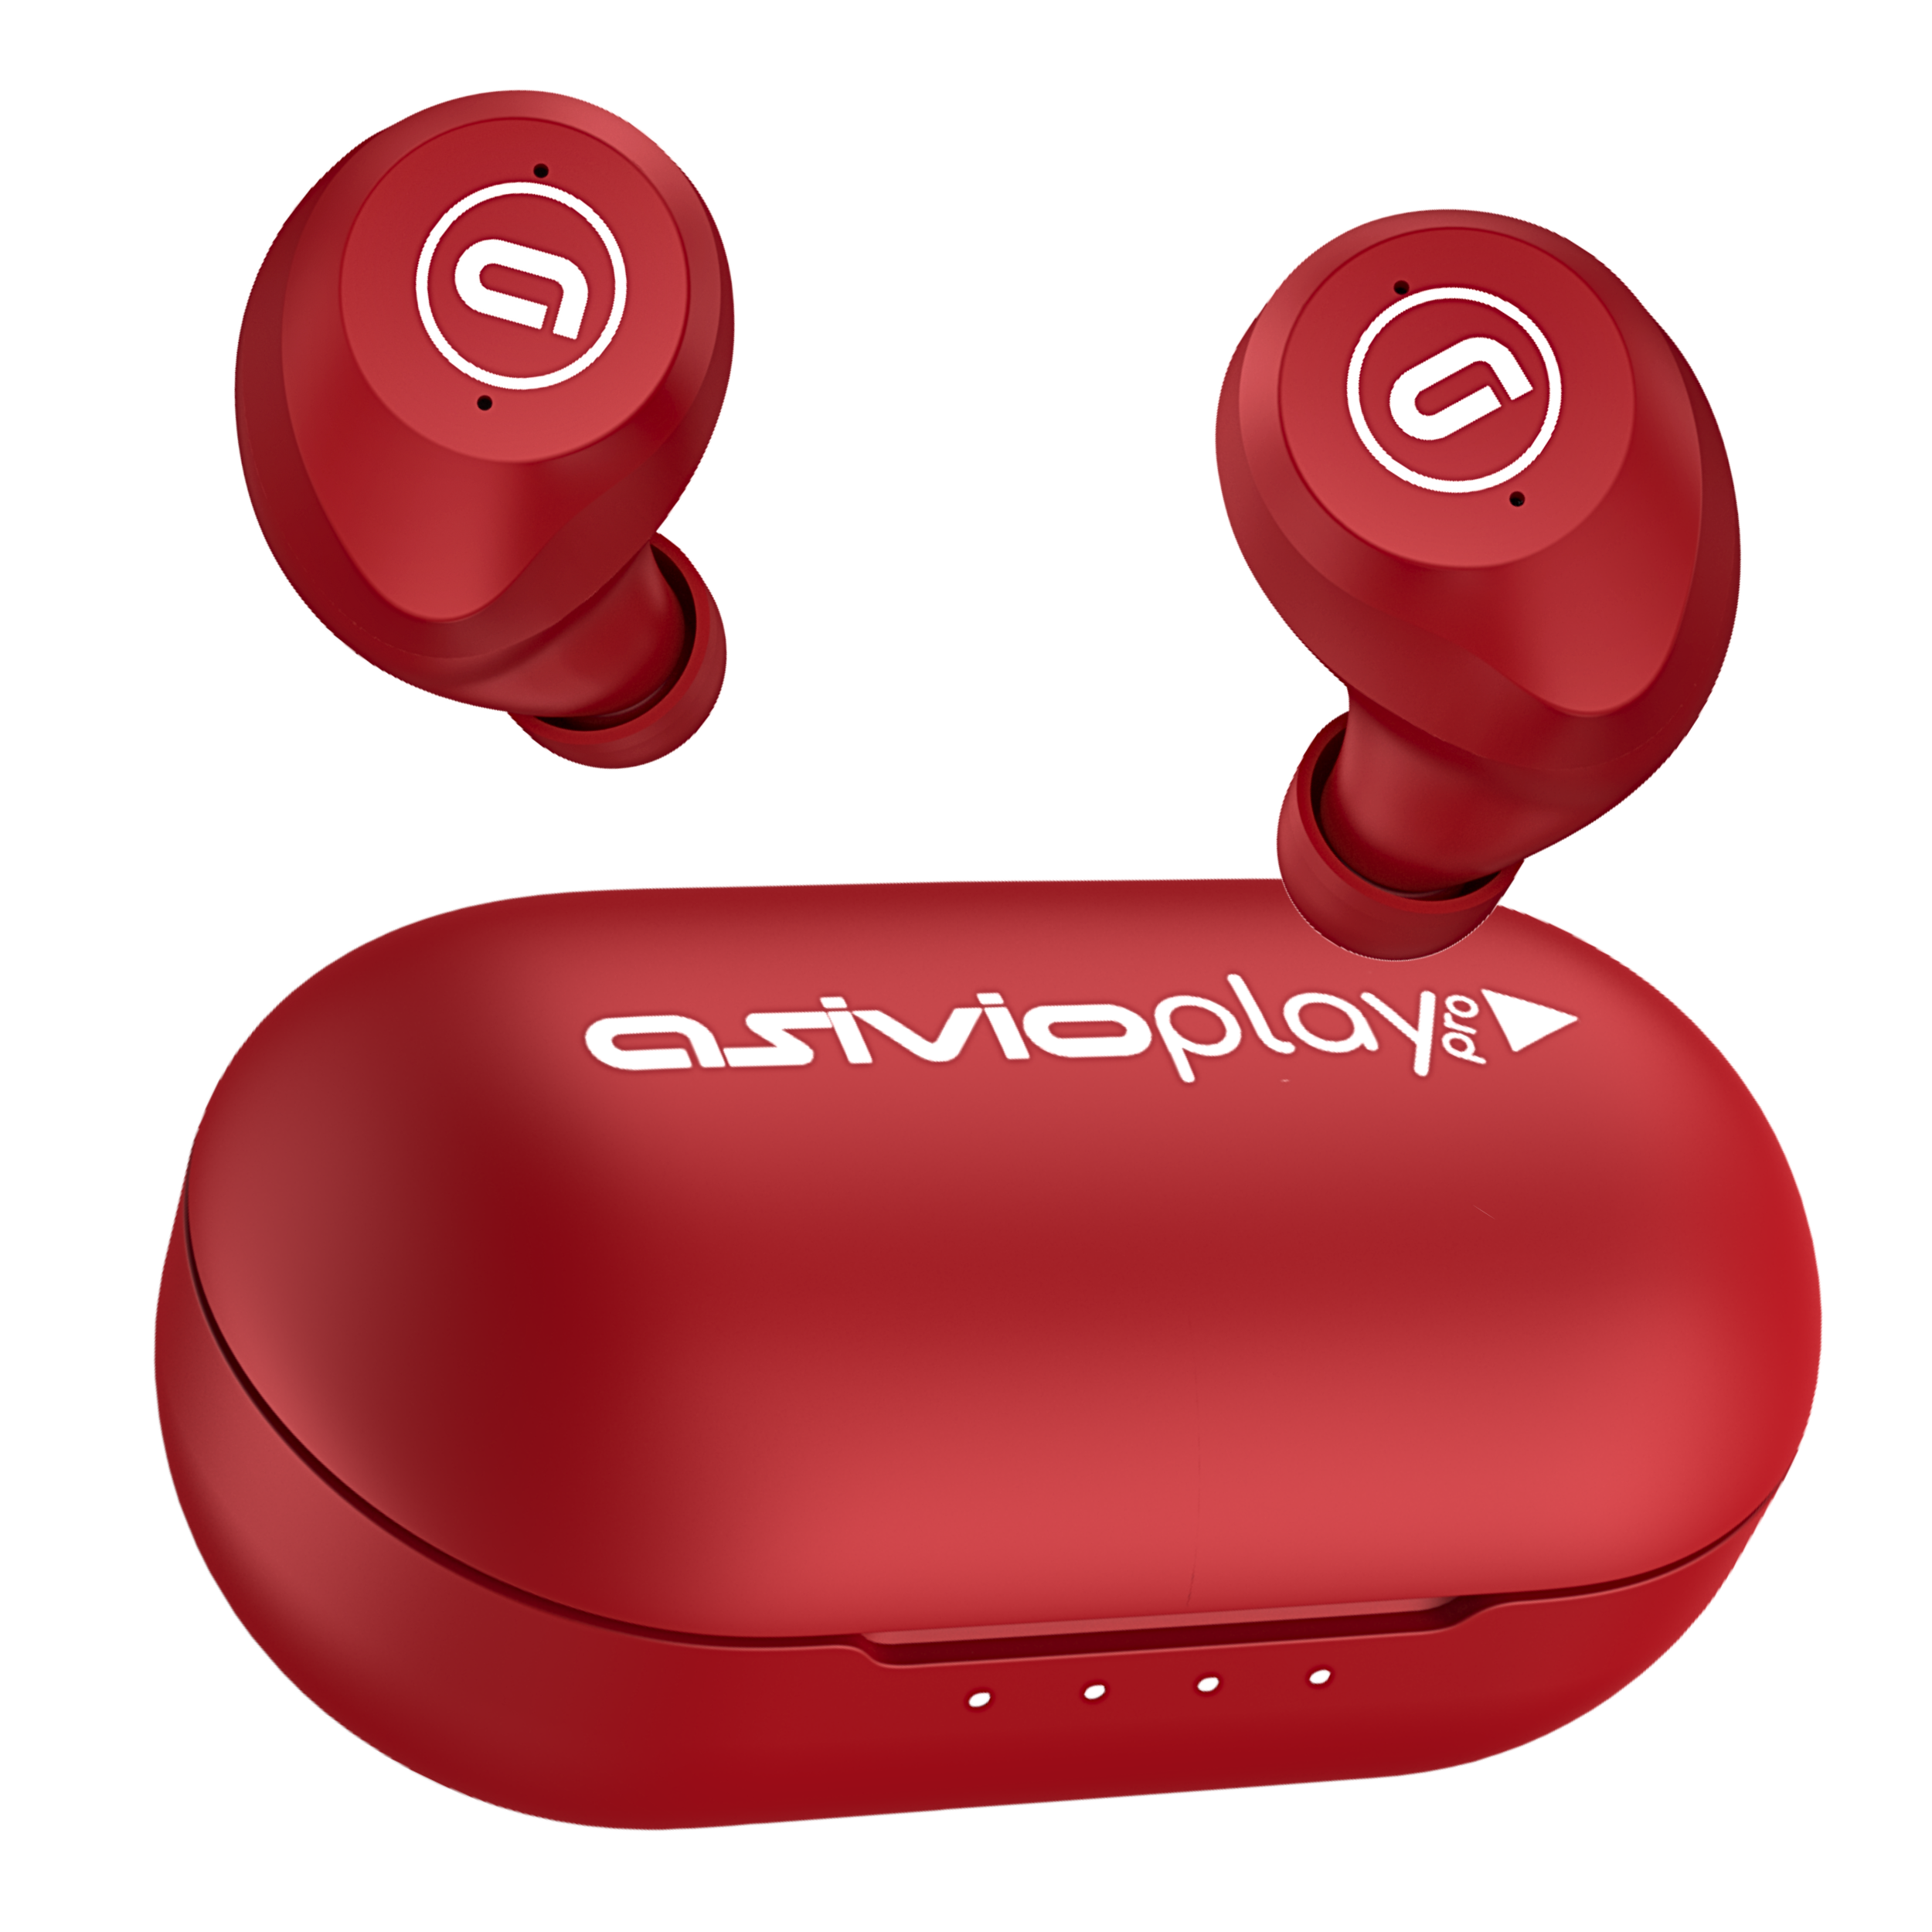 Asivio Play Pro Earbuds - Red